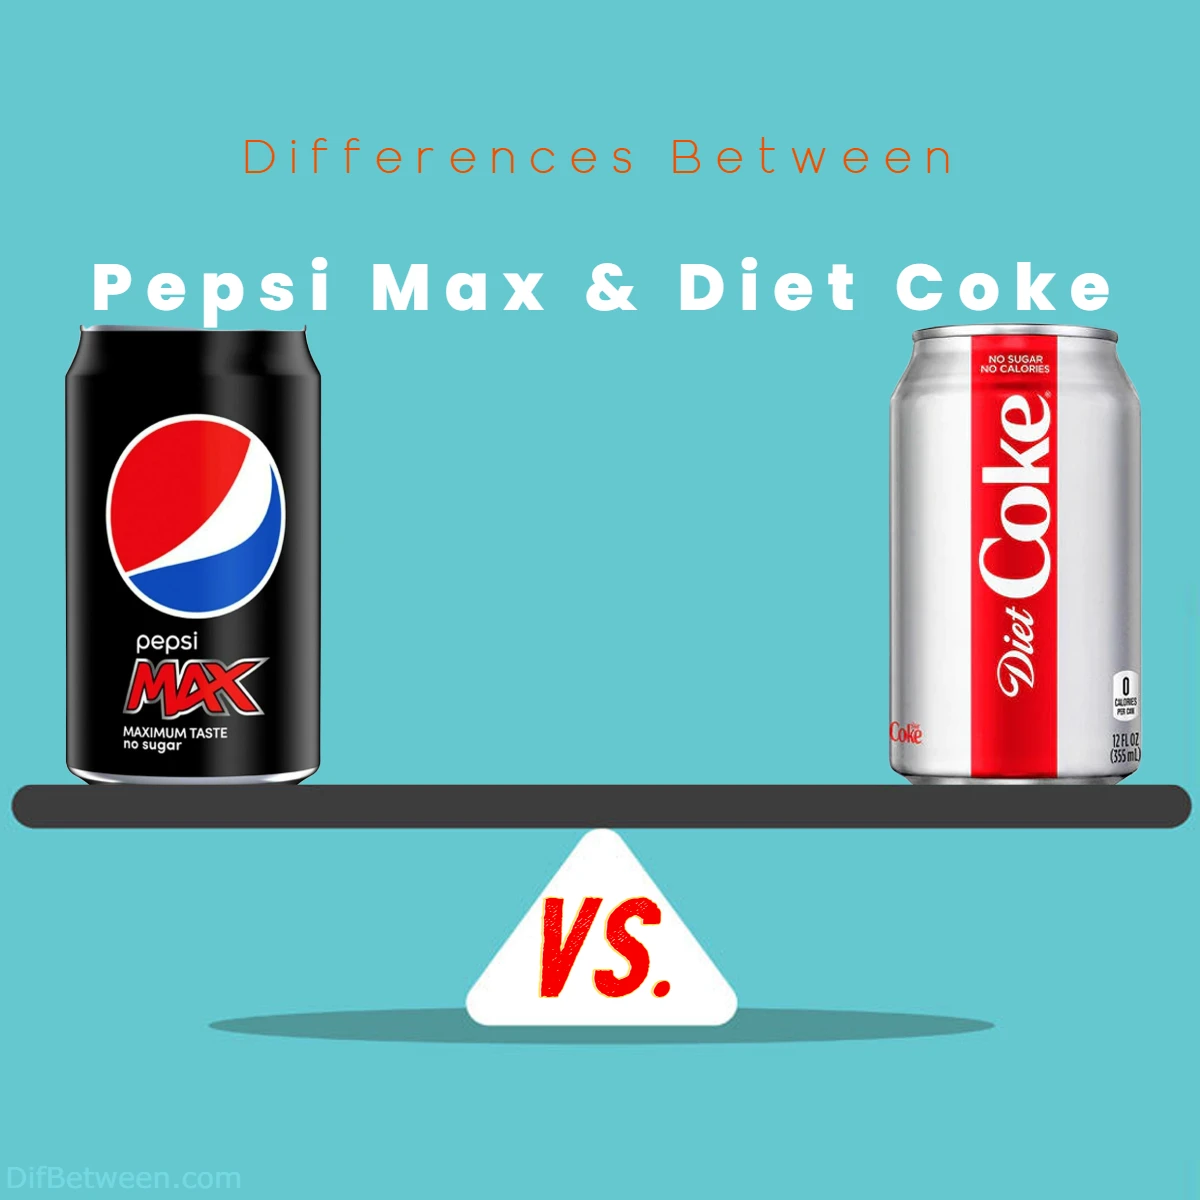 Differences Between Diet Coke and Pepsi Max